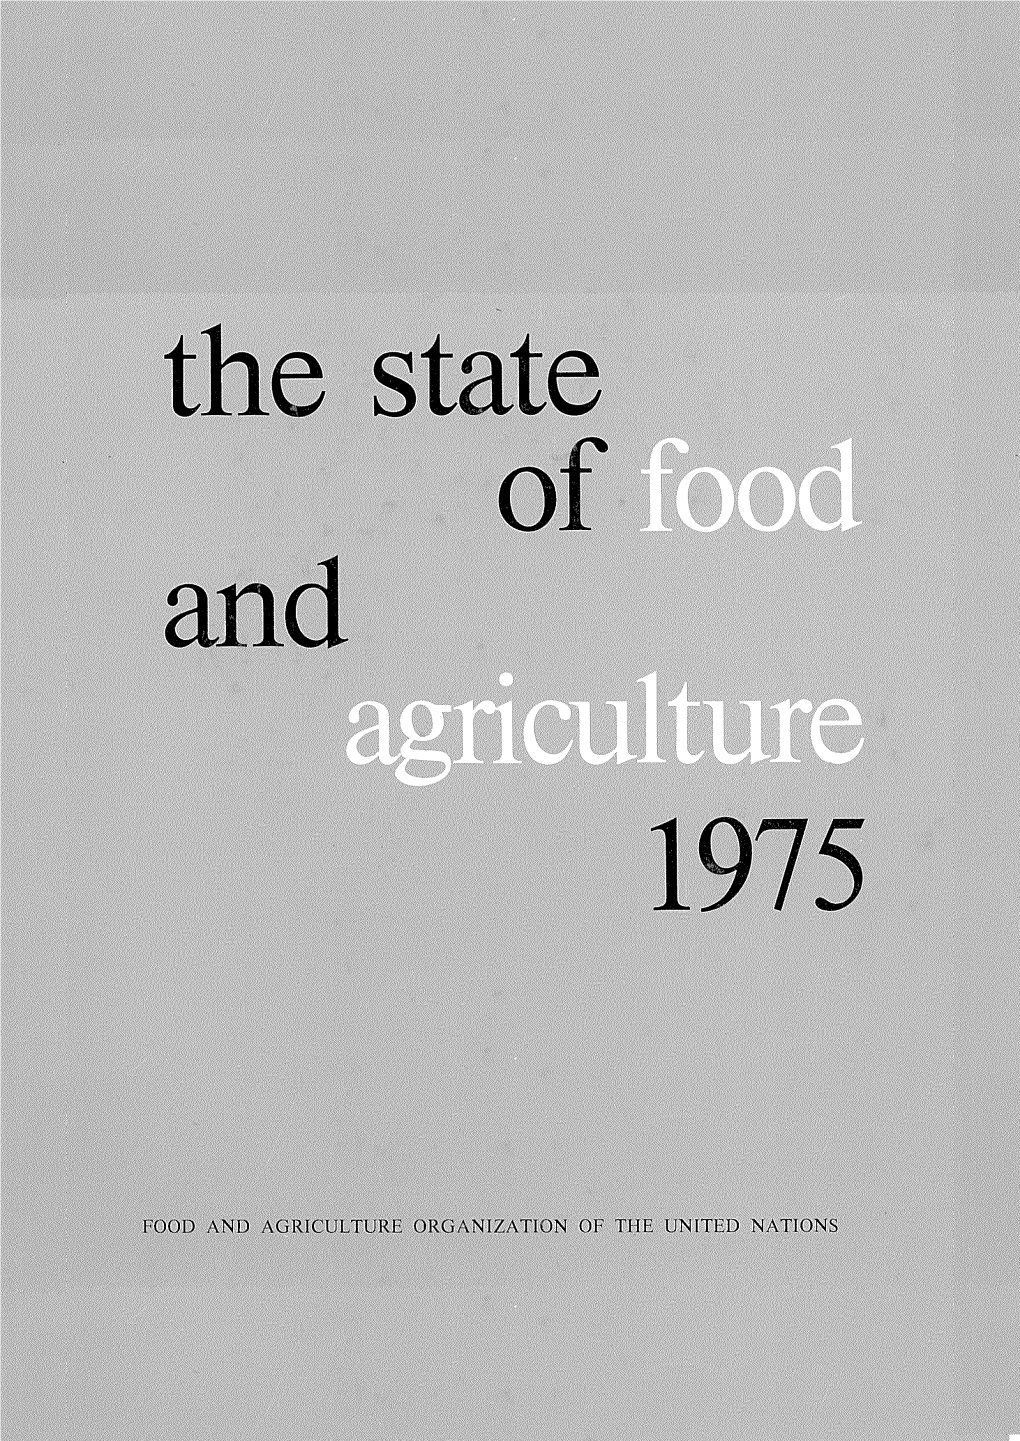 The State of Food and Agriculture, 1975